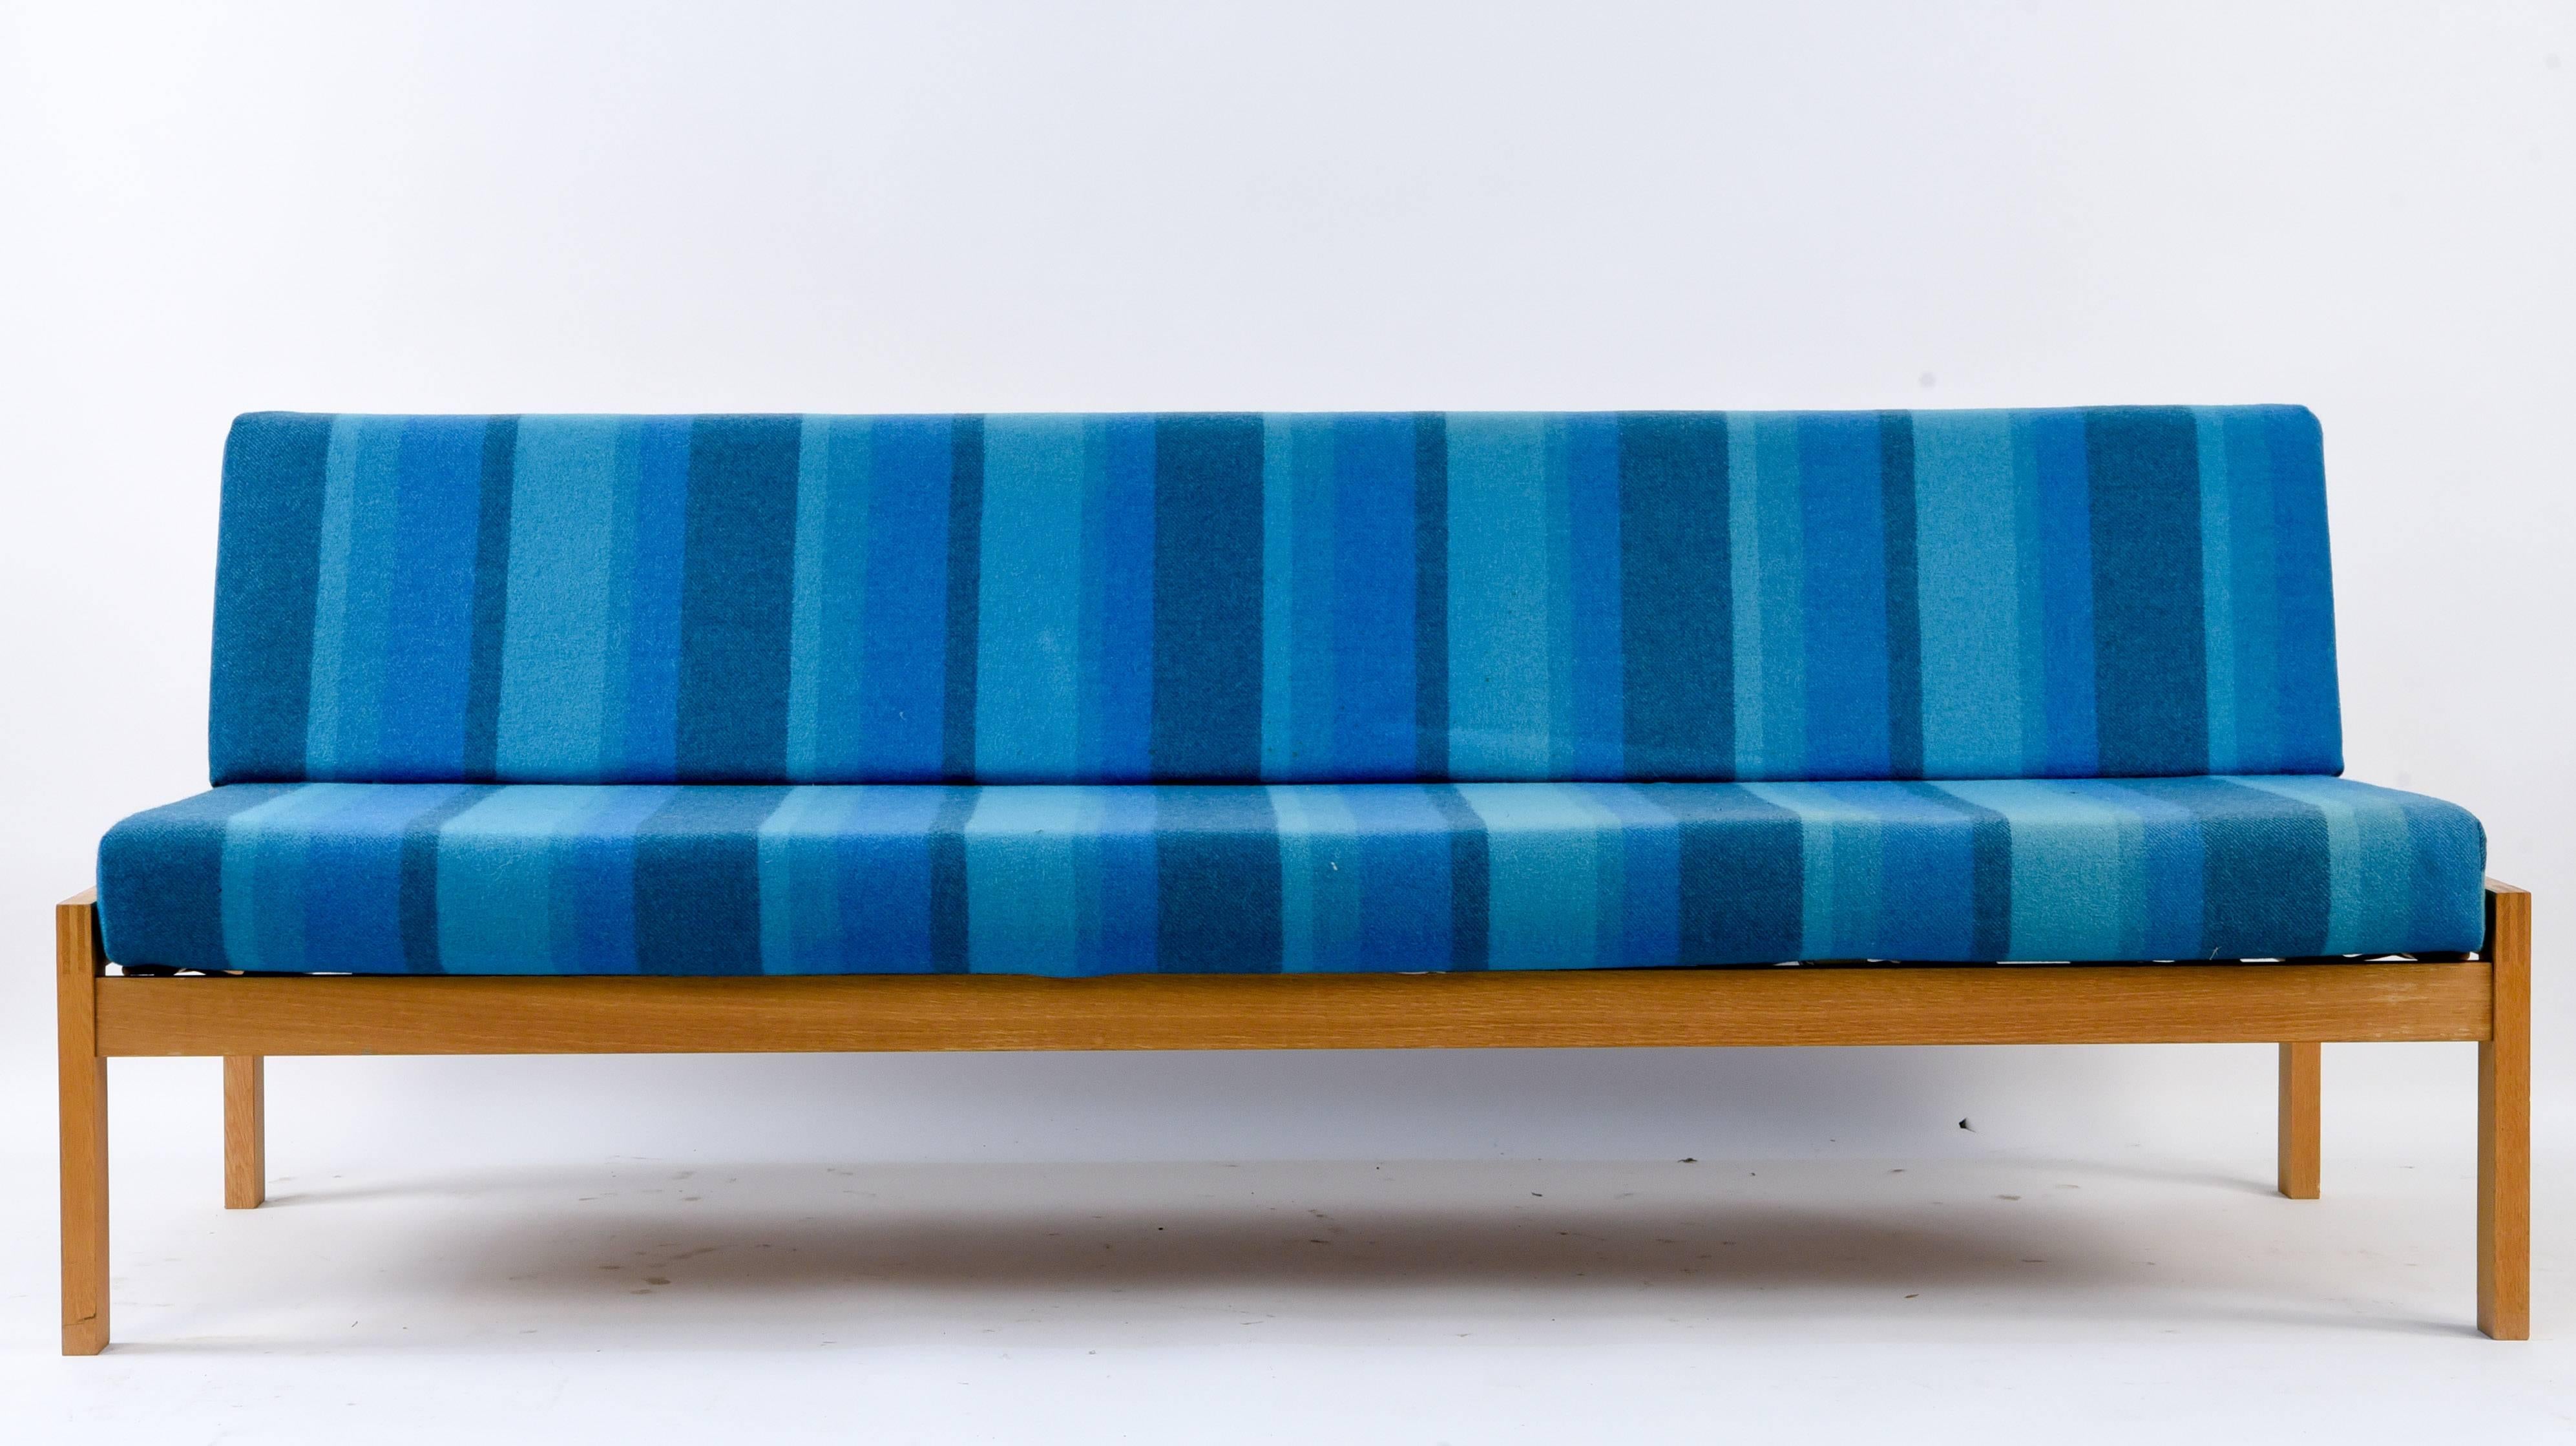 This daybed dates from 1969 and features a frame of oakwood with striped blue upholstery. Made by Erhardsen & Andsersen, sometimes stylized as ERAN. The simplistic lines of this form make it a versatile Minimalist piece.